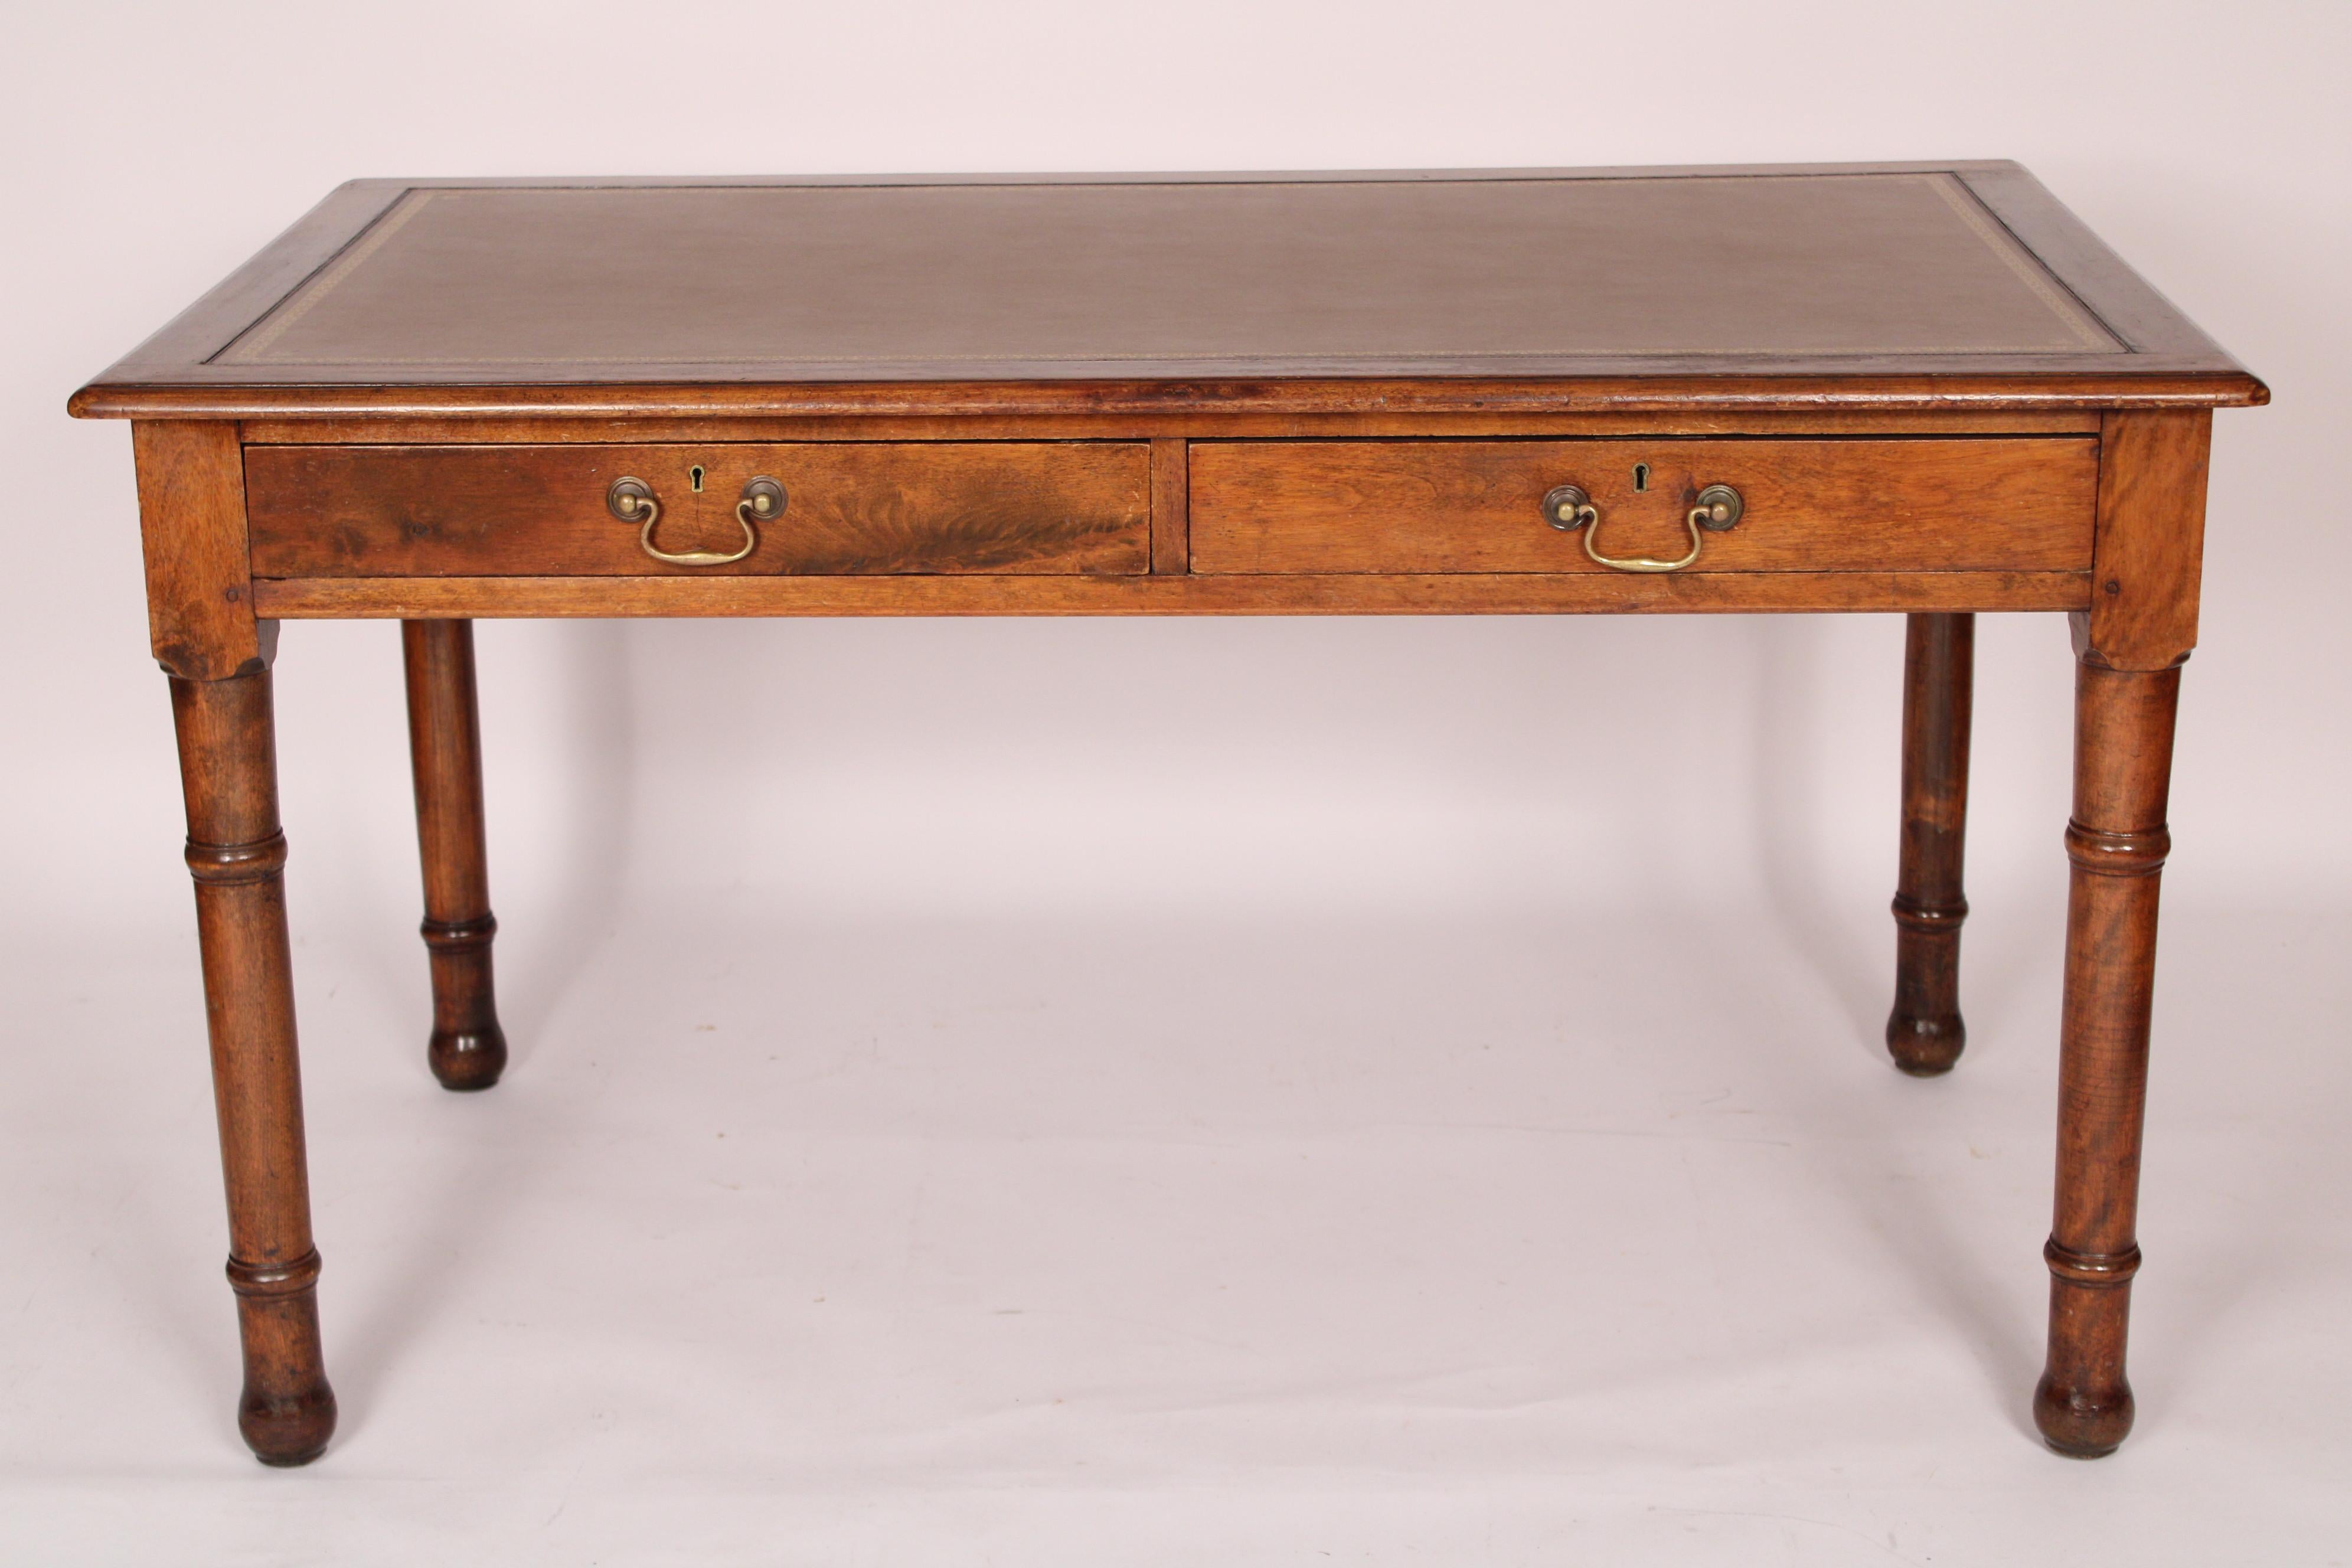 English Edwardian beech wood writing table with a tooled leather top, circa 1910. With an overhanging thumb molded top inset with tooled leather, two frieze drawers with brass pulls, resting on bamboo style turned legs. Knee clearance 24